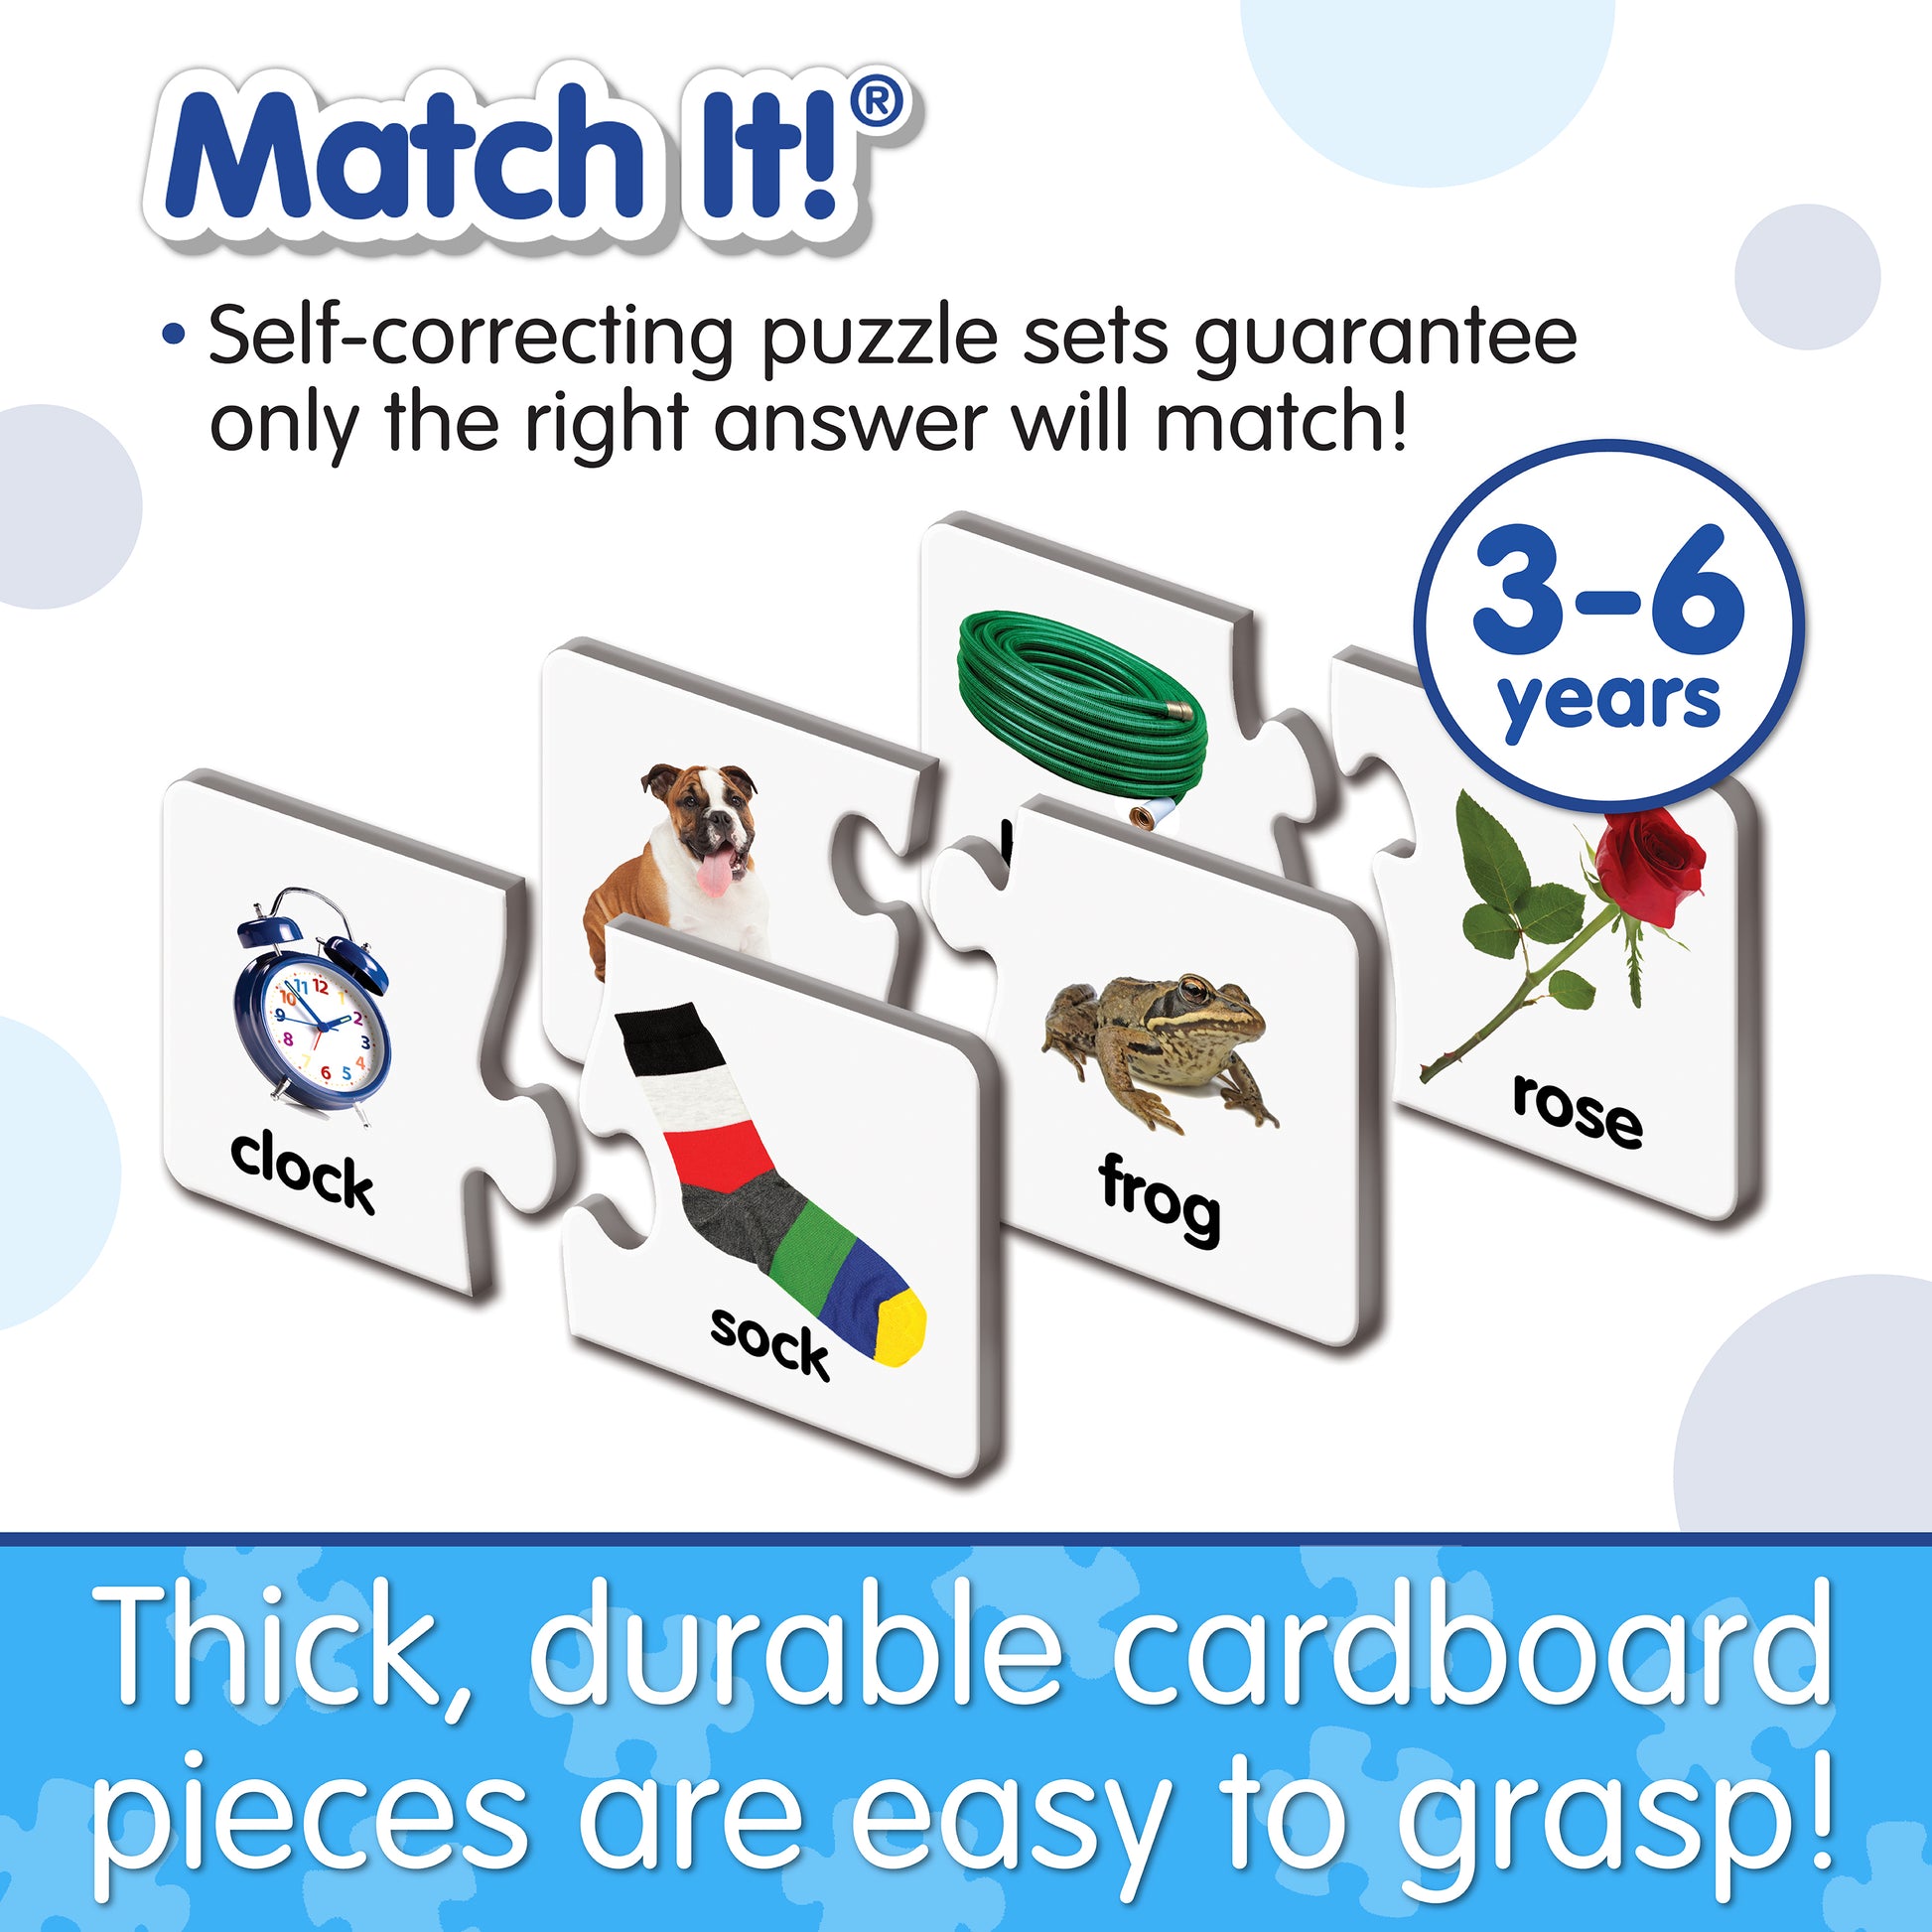 Infographic about Match It - Rhyme's features that says, "Thick, durable cardboard pieces are easy to grasp!"